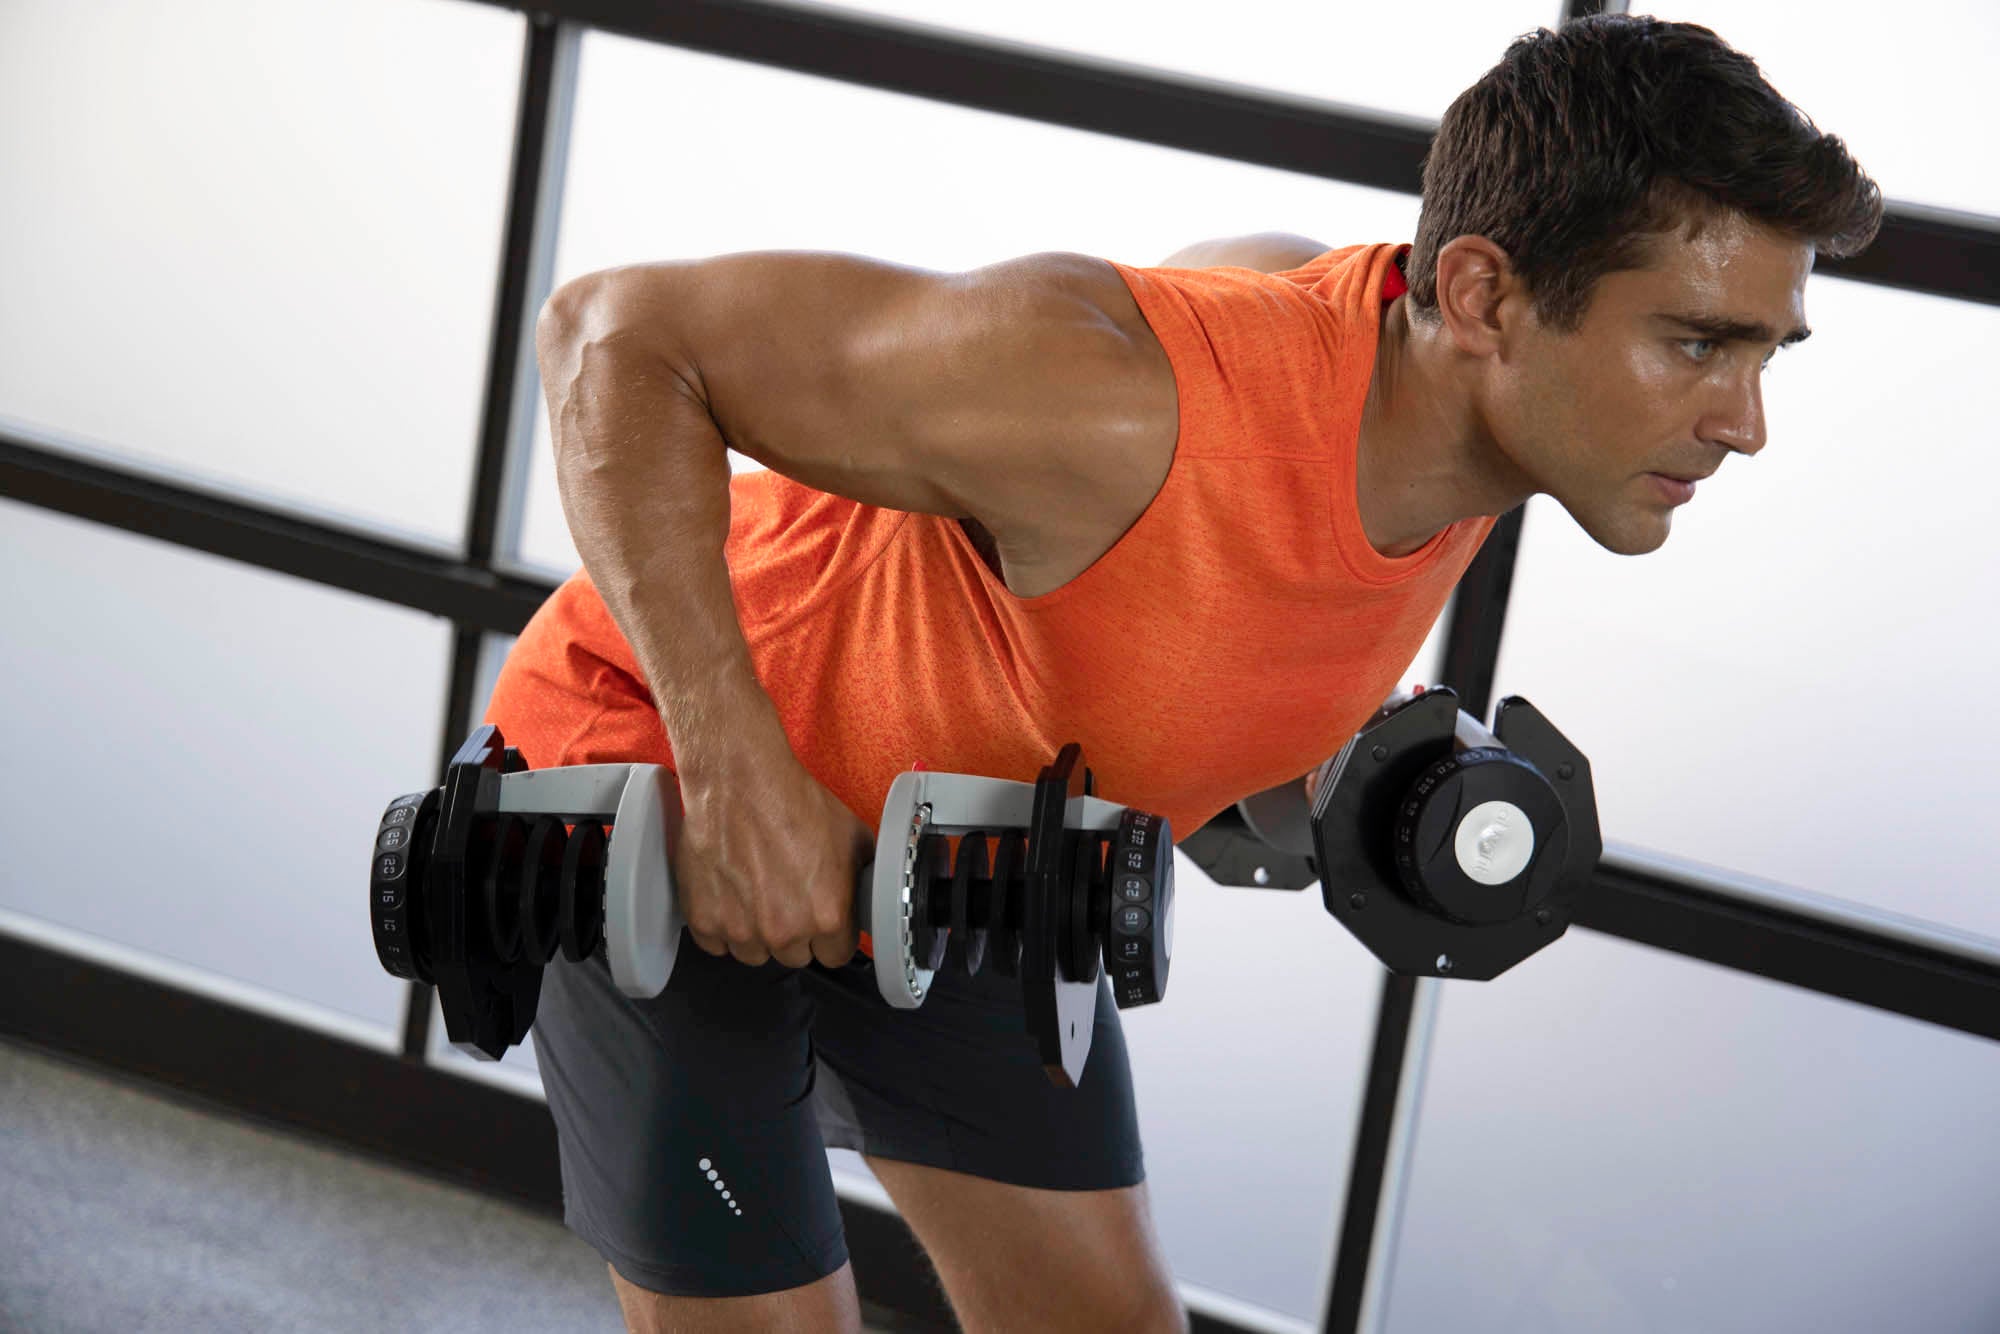 Pull day workouts with dumbbells